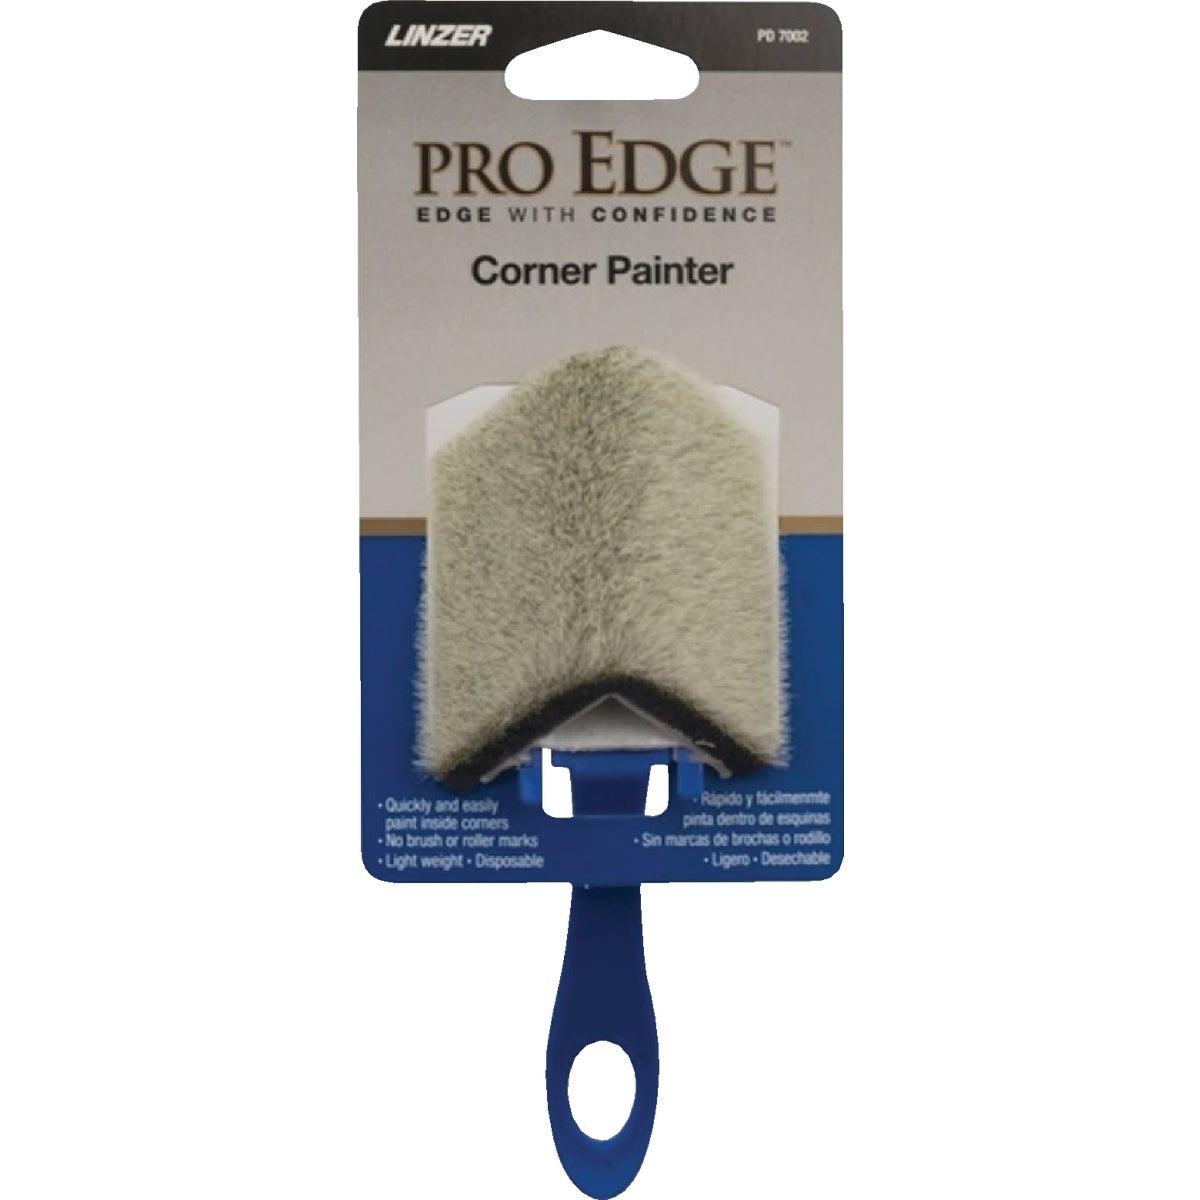 Item 772369, Linzer Pro Edge corner painter is designed to quickly and easily paint 